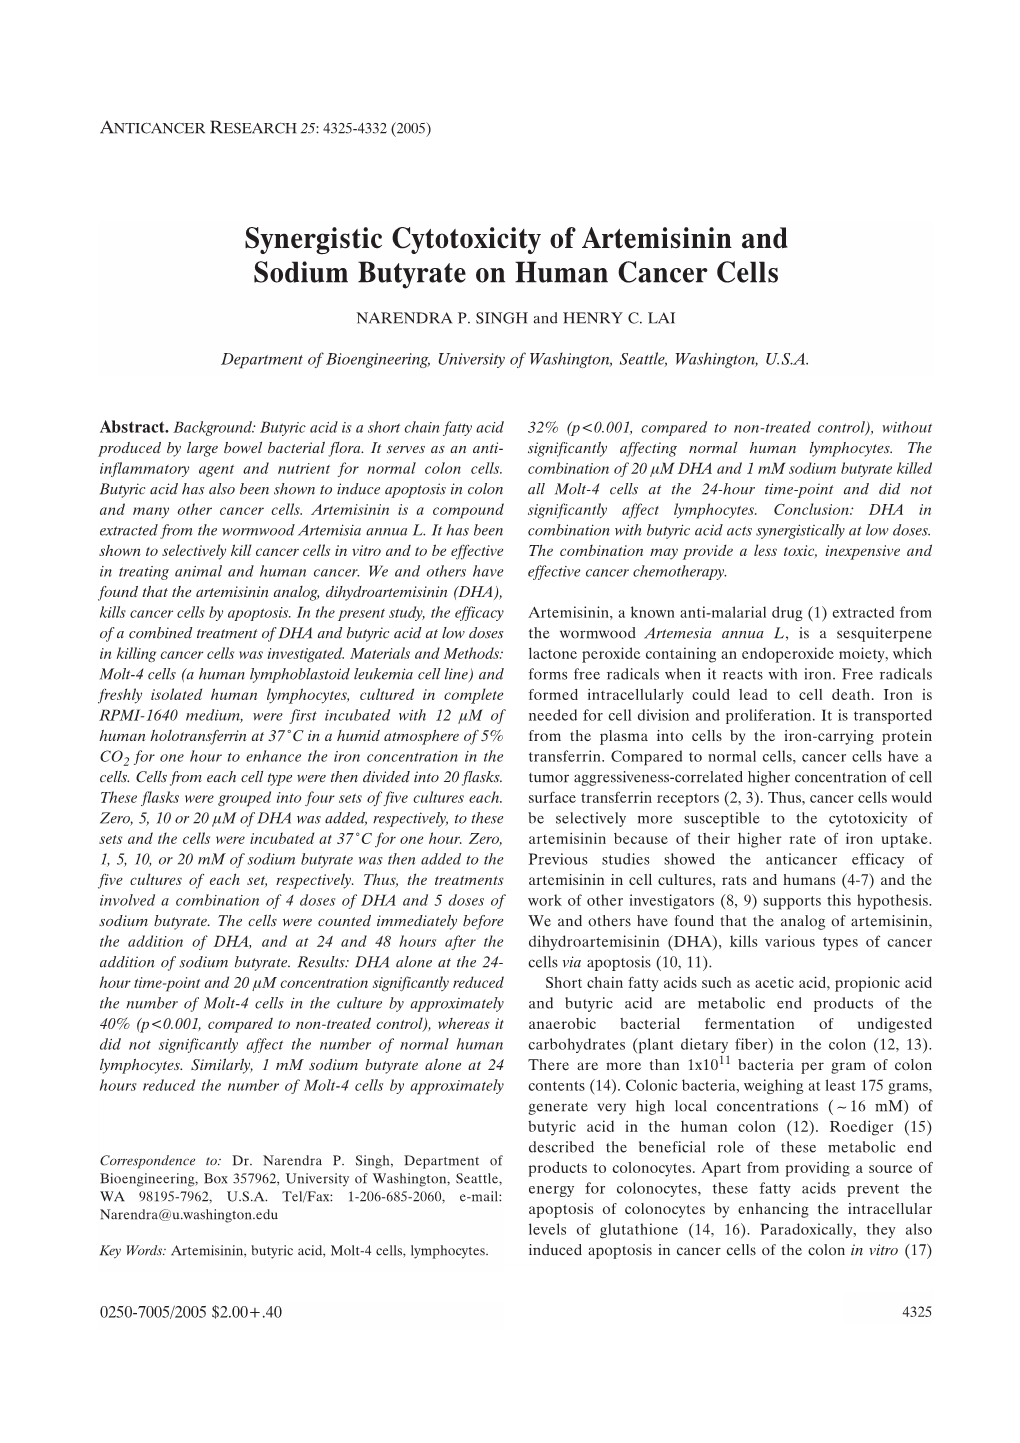 Synergistic Cytotoxicity of Artemisinin and Sodium Butyrate on Human Cancer Cells